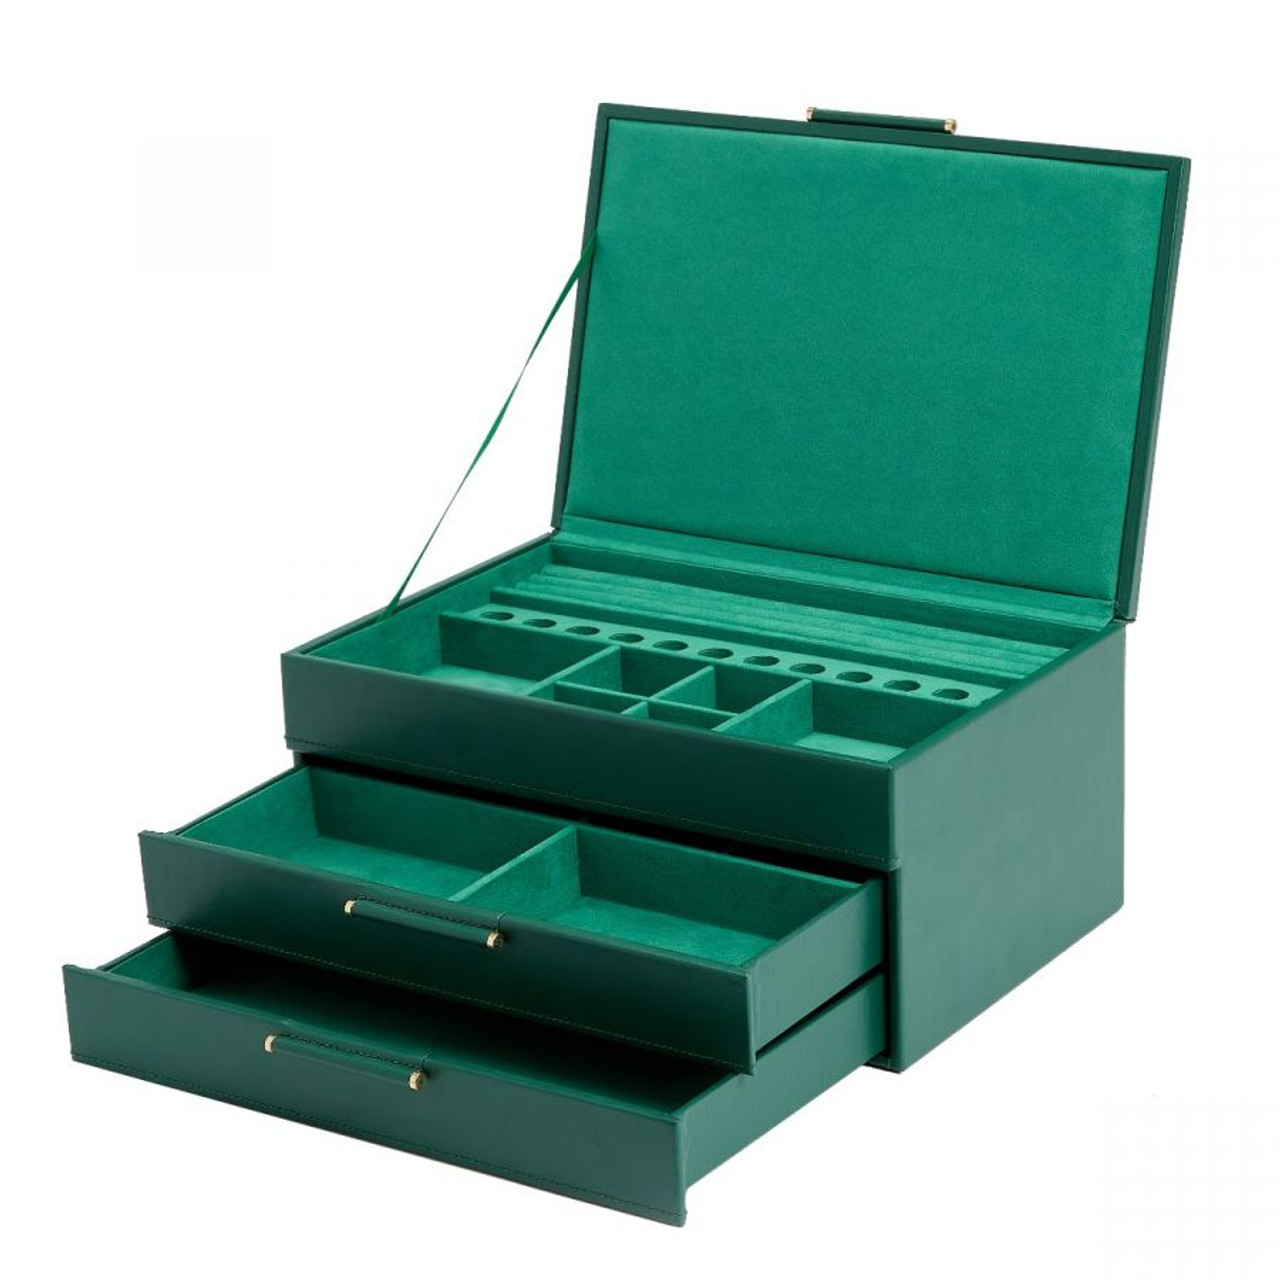 WOLF Jewelry Boxes & Jewelry Holders